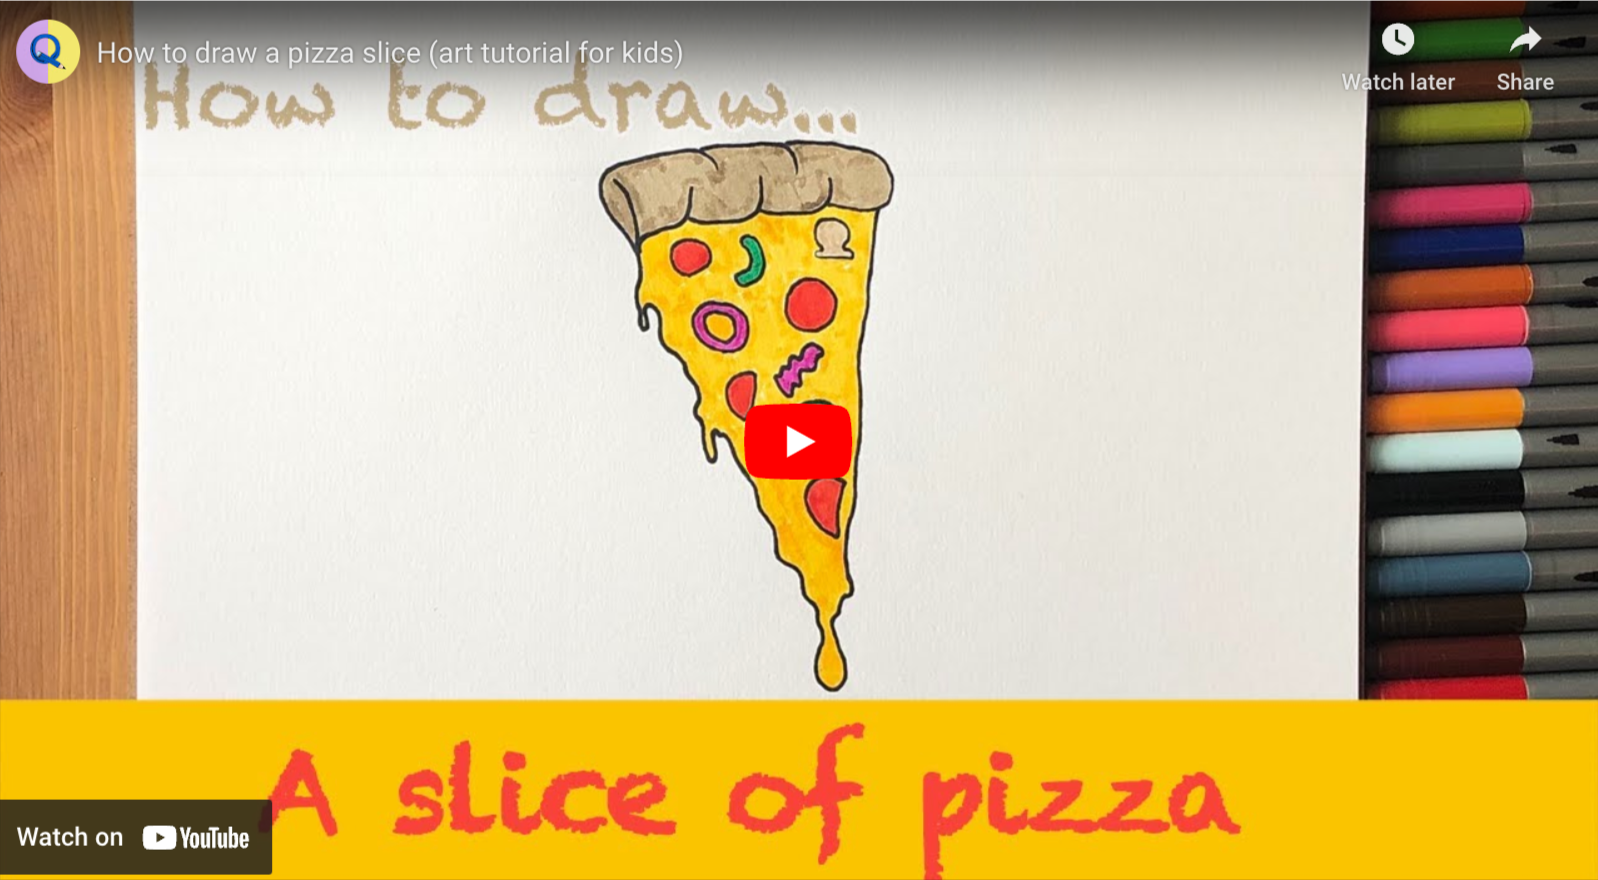 Load video: How to draw a pizza slice video